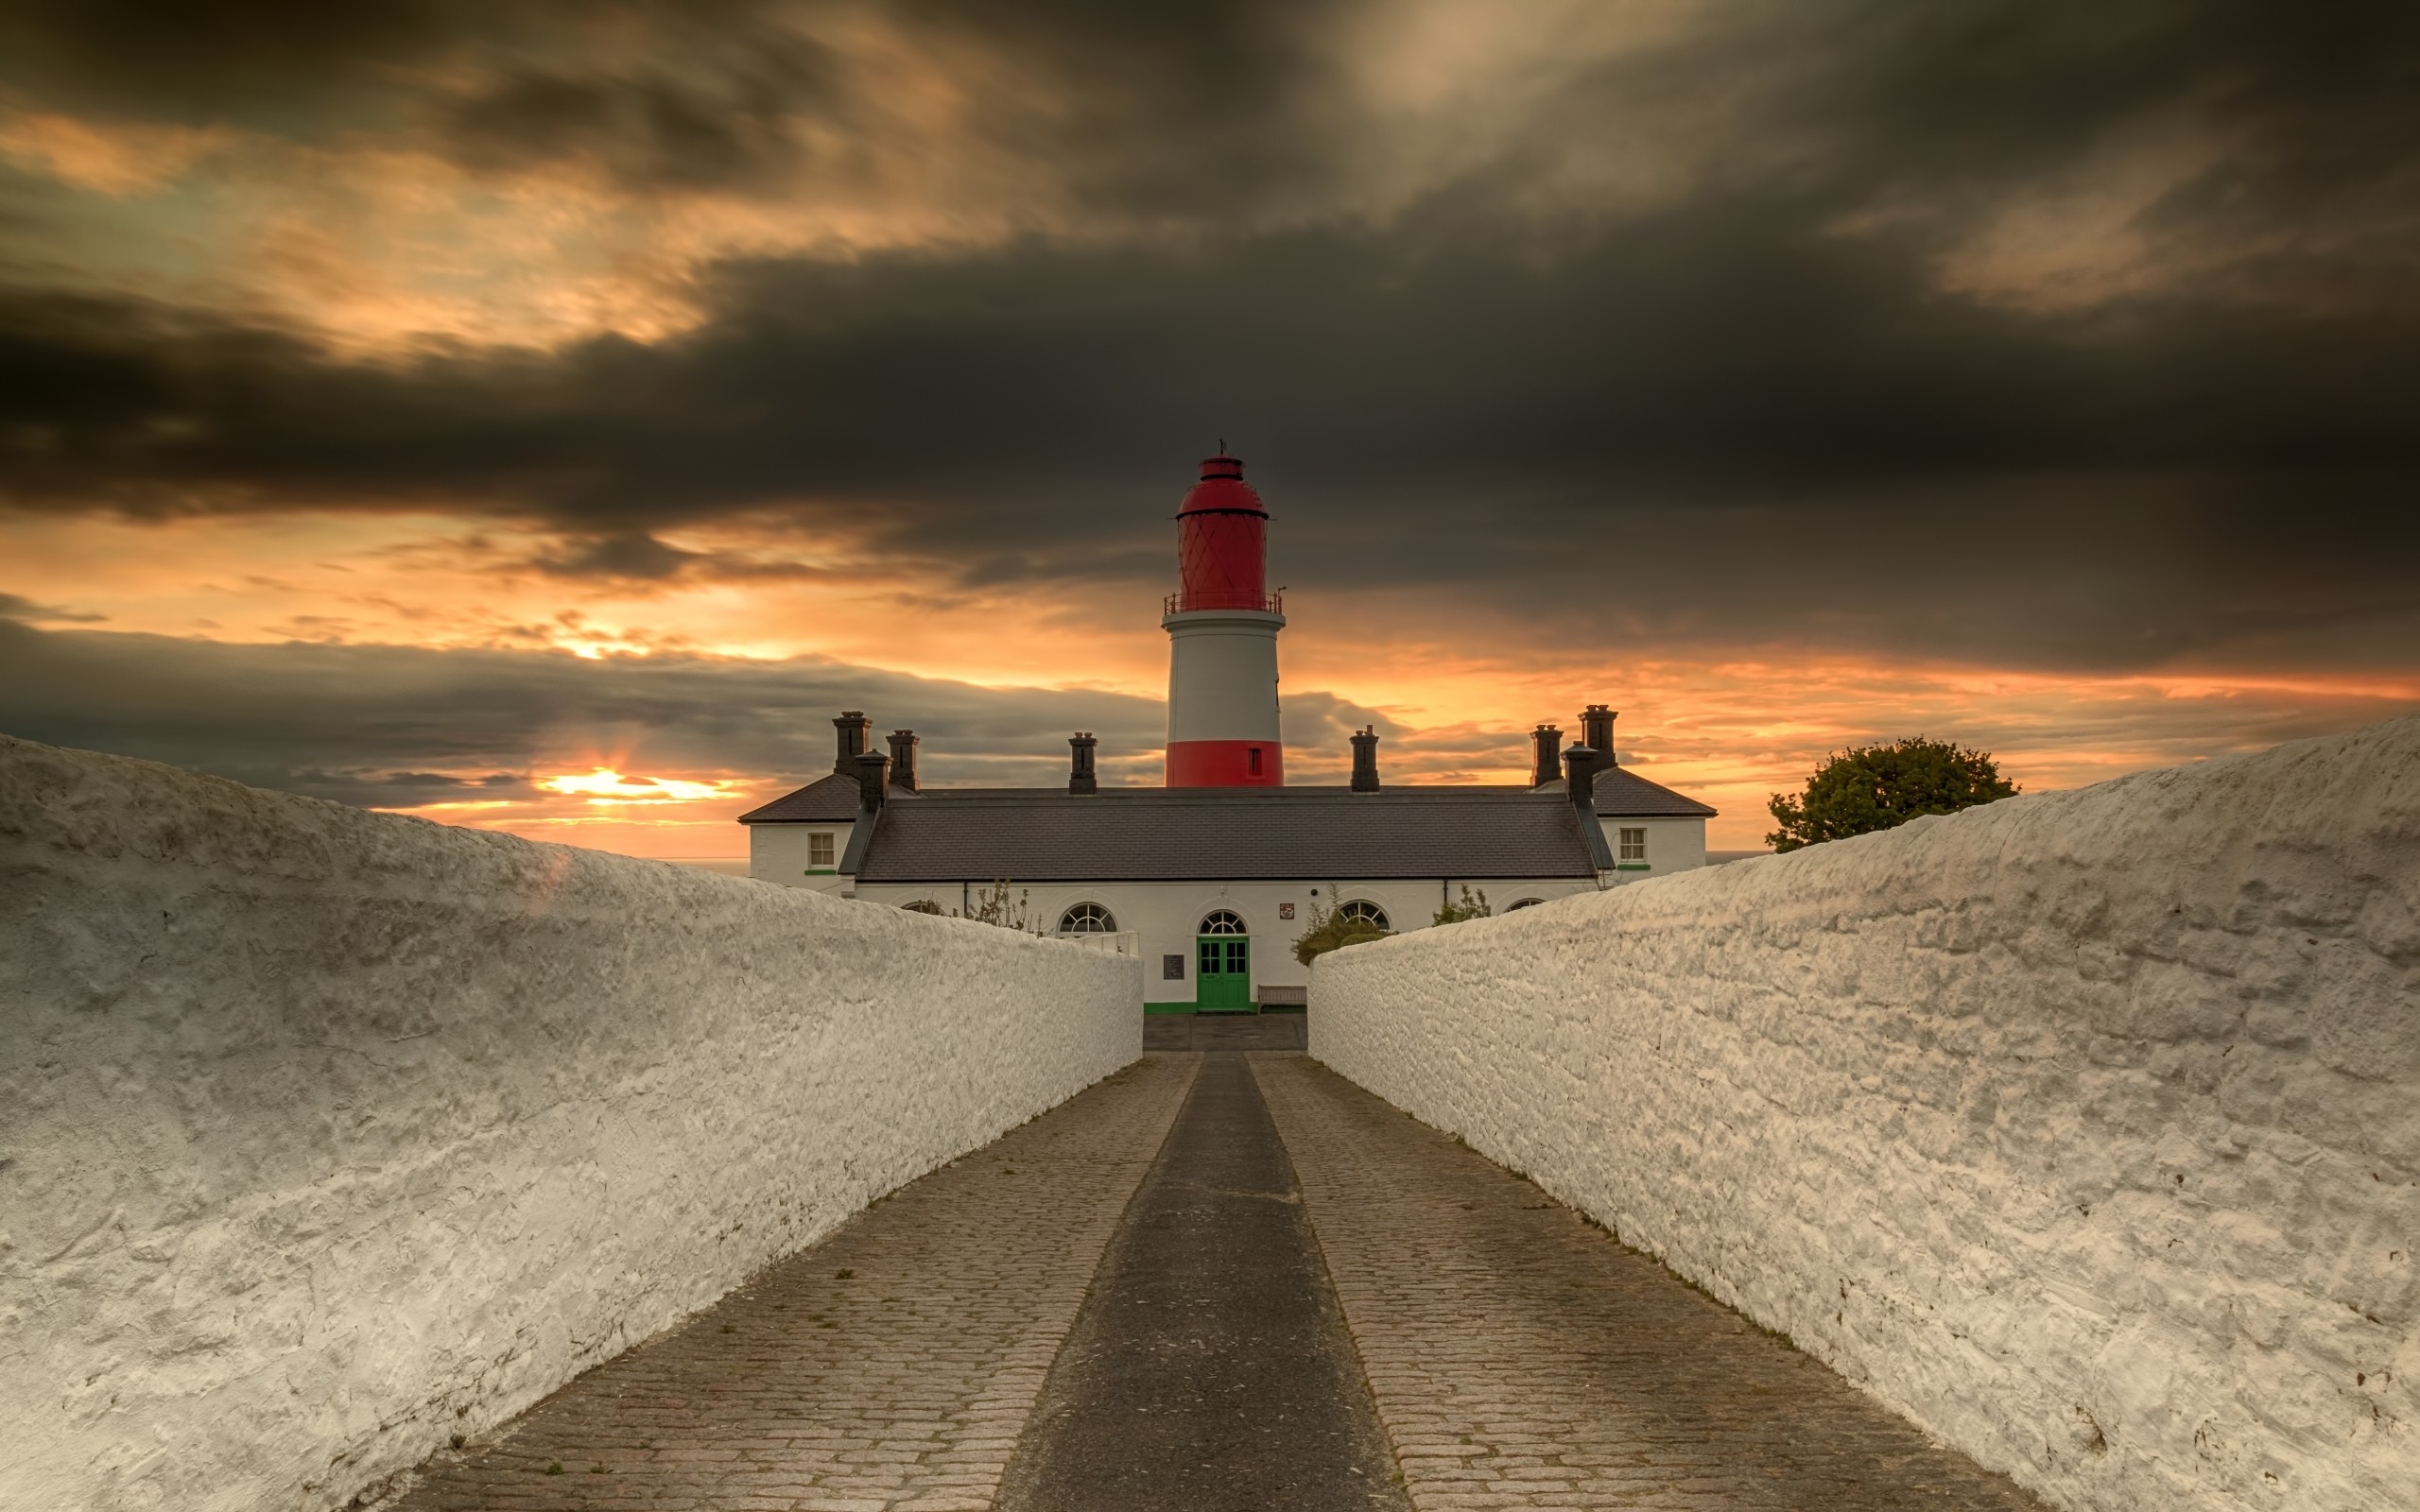 General 2560x1600 nature trees clouds lighthouse HDR road house wall symmetry sky sunlight